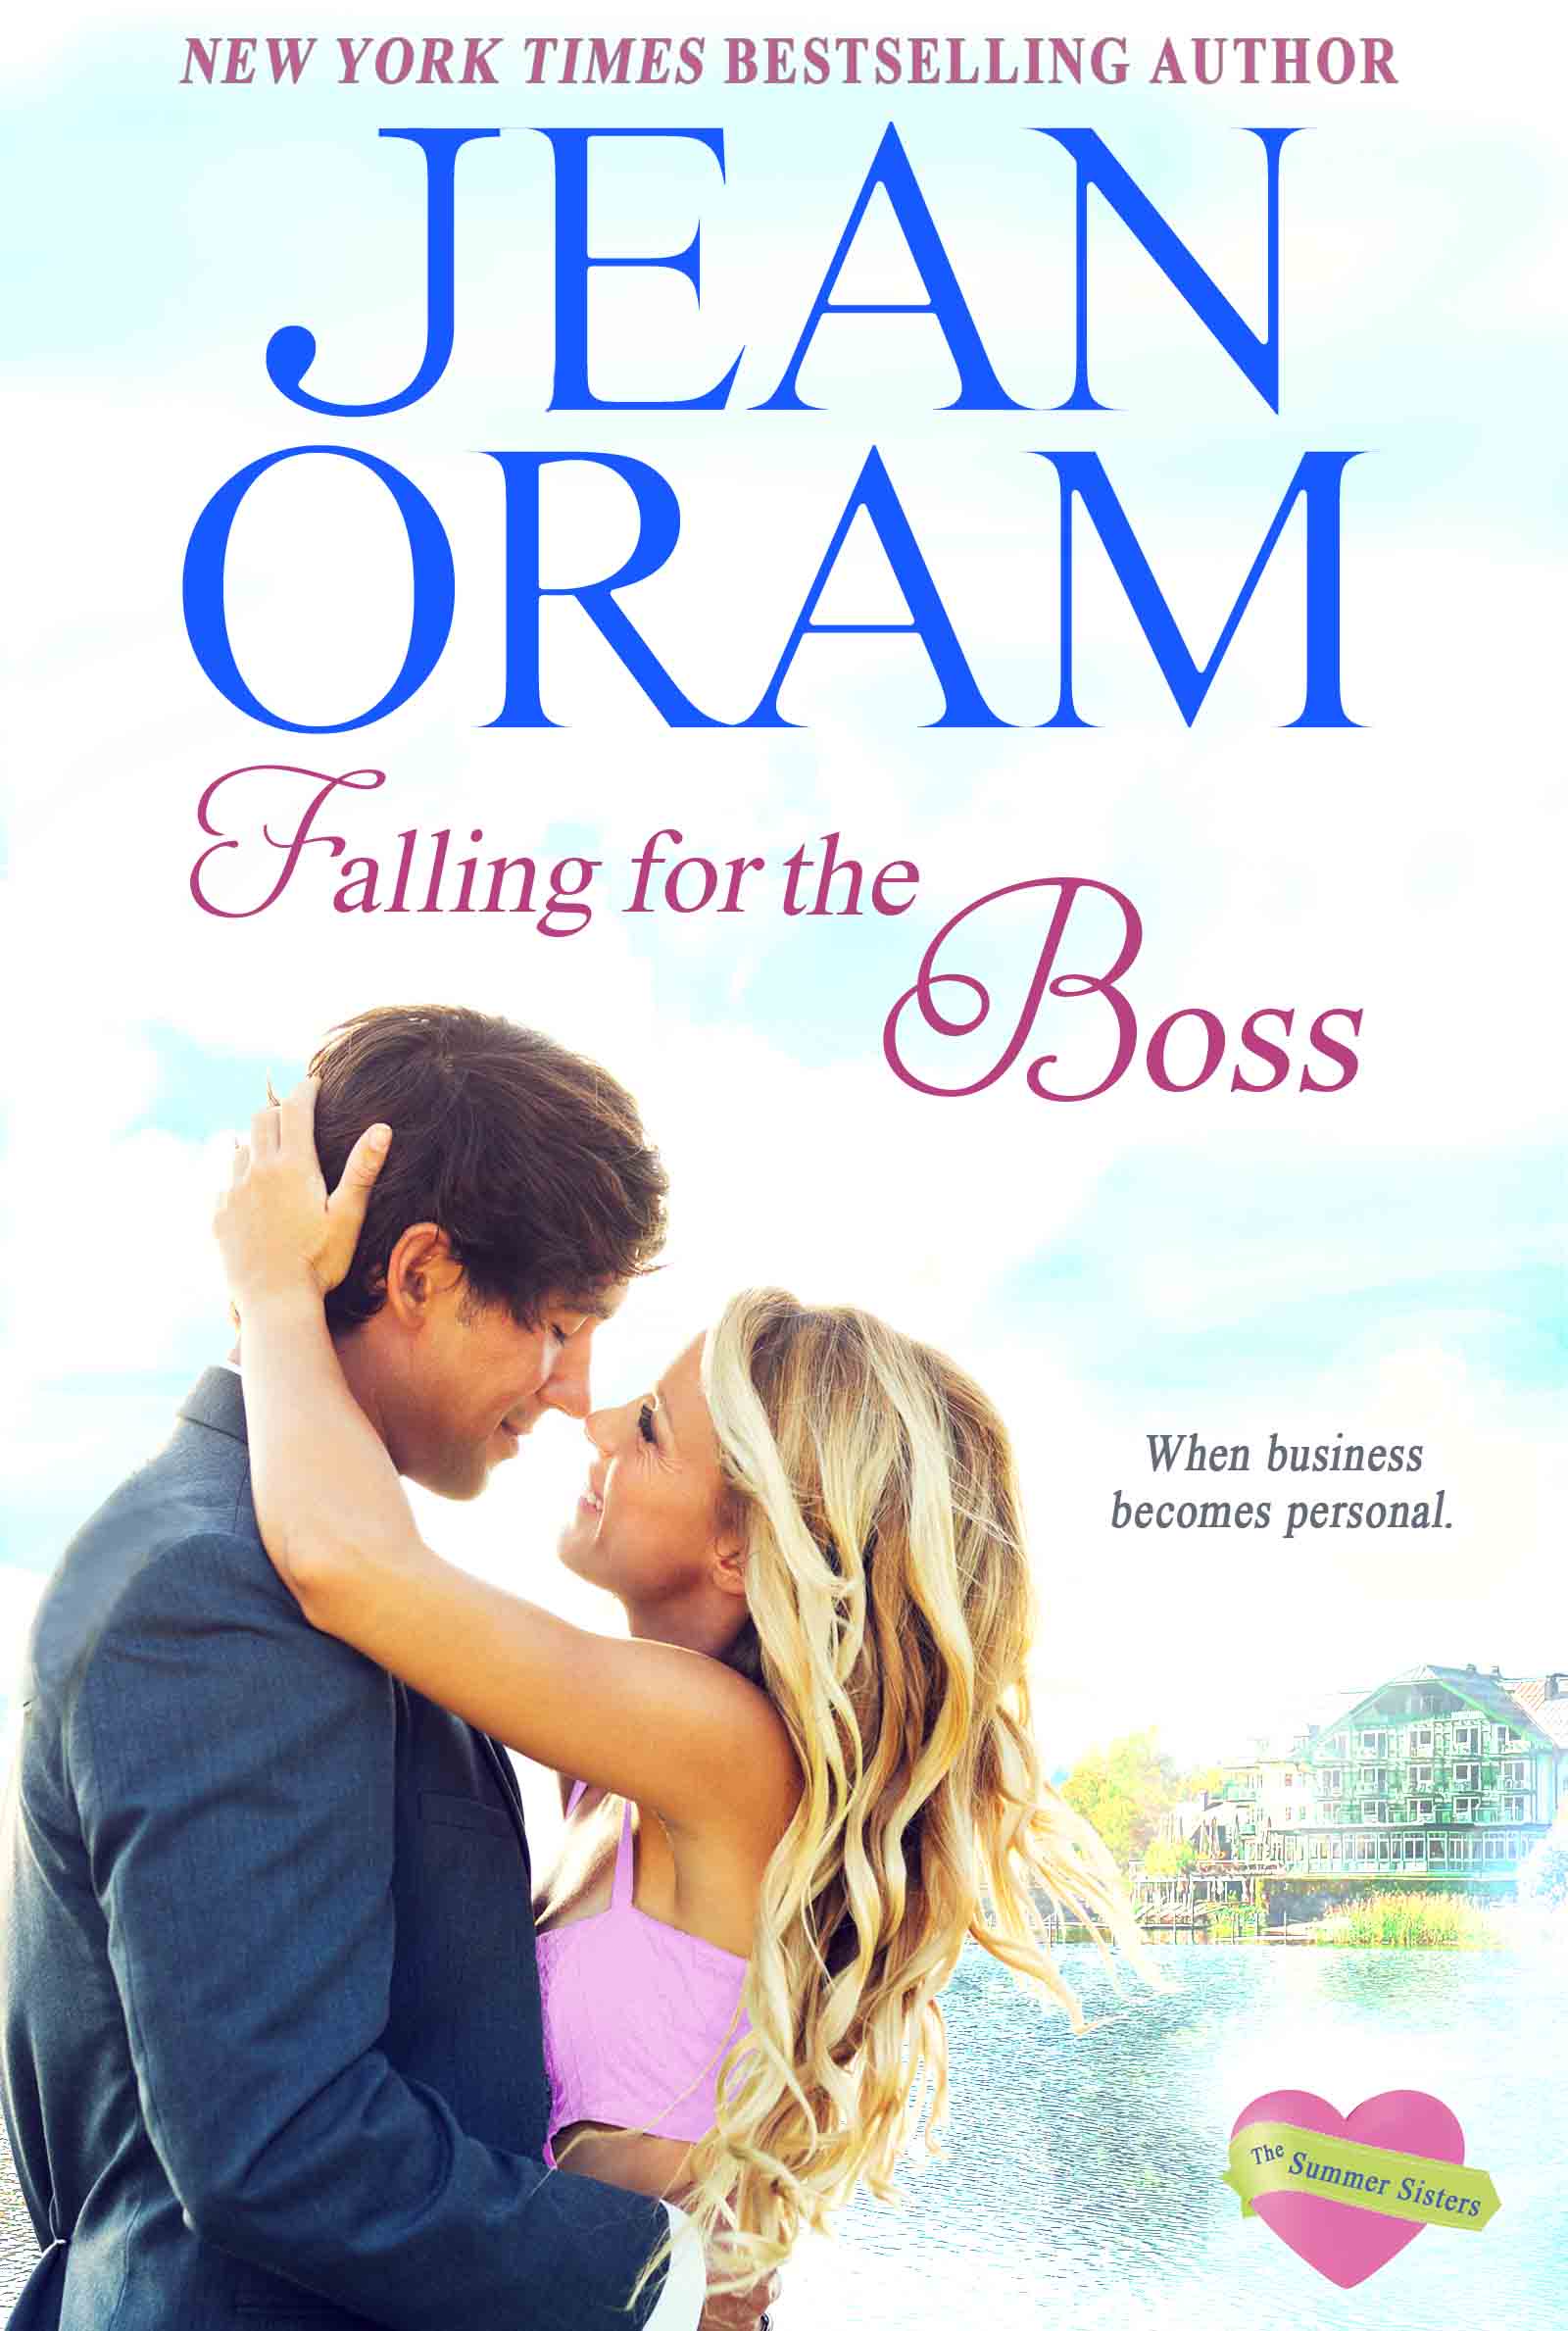 Falling for the Boss - Love and Dreams by Jean Oram. Irresistible sweet small town romances. The Summer Sisters tycoon sweet romance.